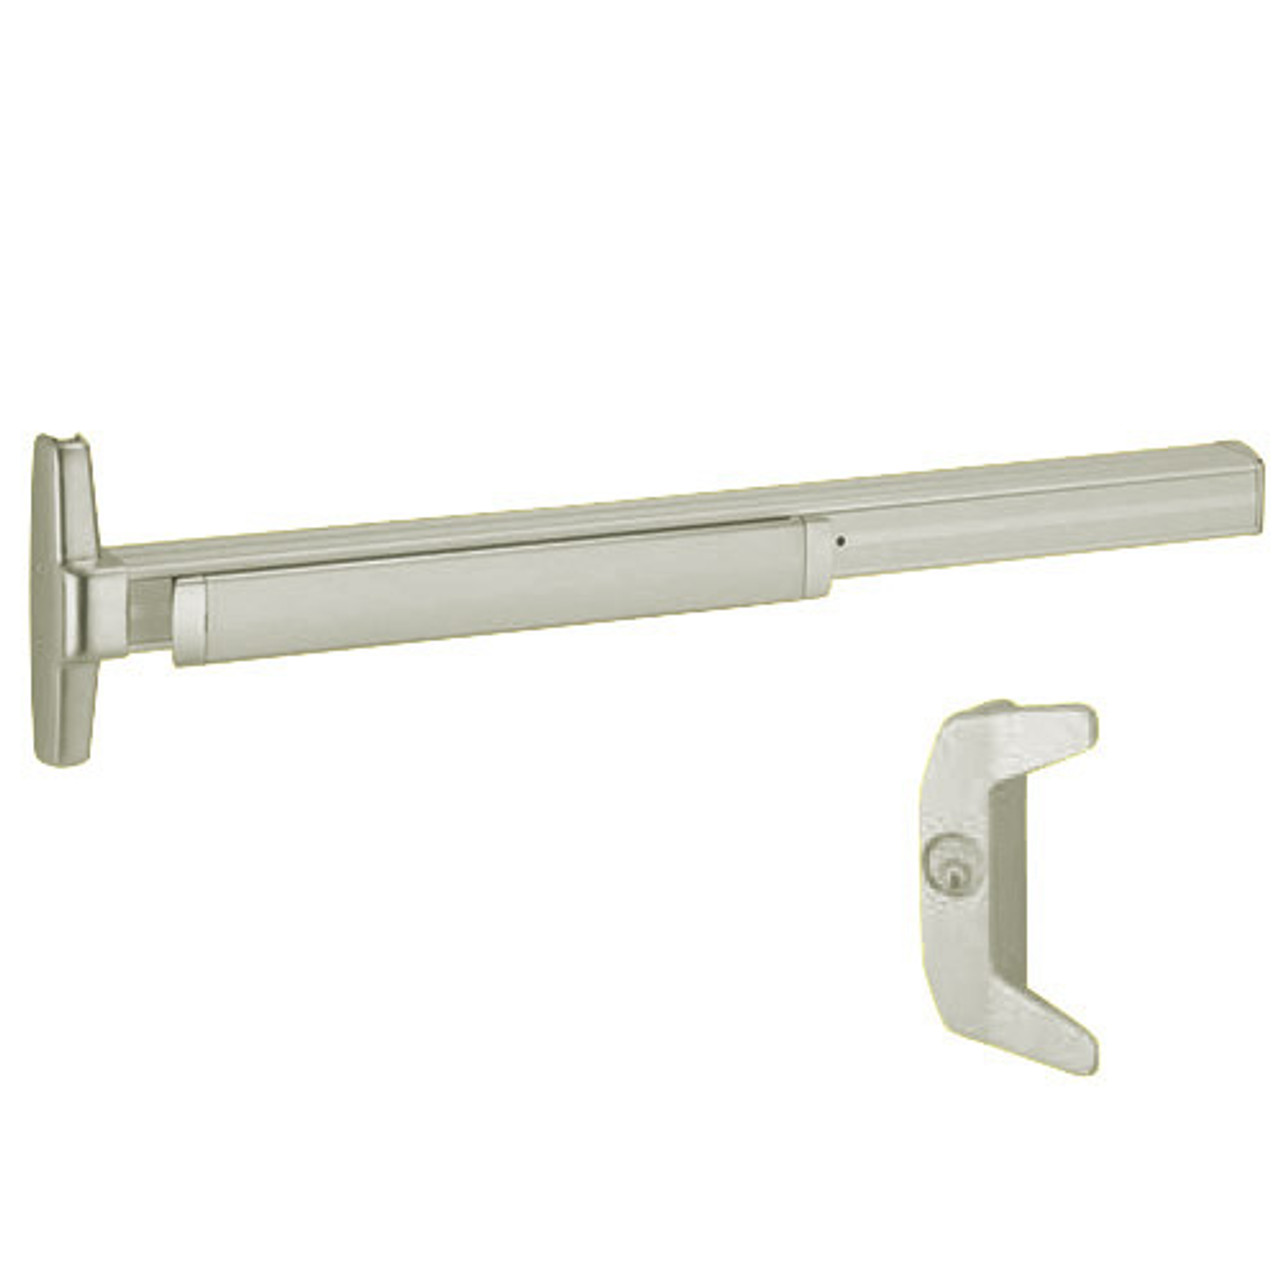 3548A-NL-LHR-F-US15-3 Von Duprin 3548A Series with 386NL Night Latch Fire-Rated Exit Device for Hollow Metal Doors in Satin Nickel